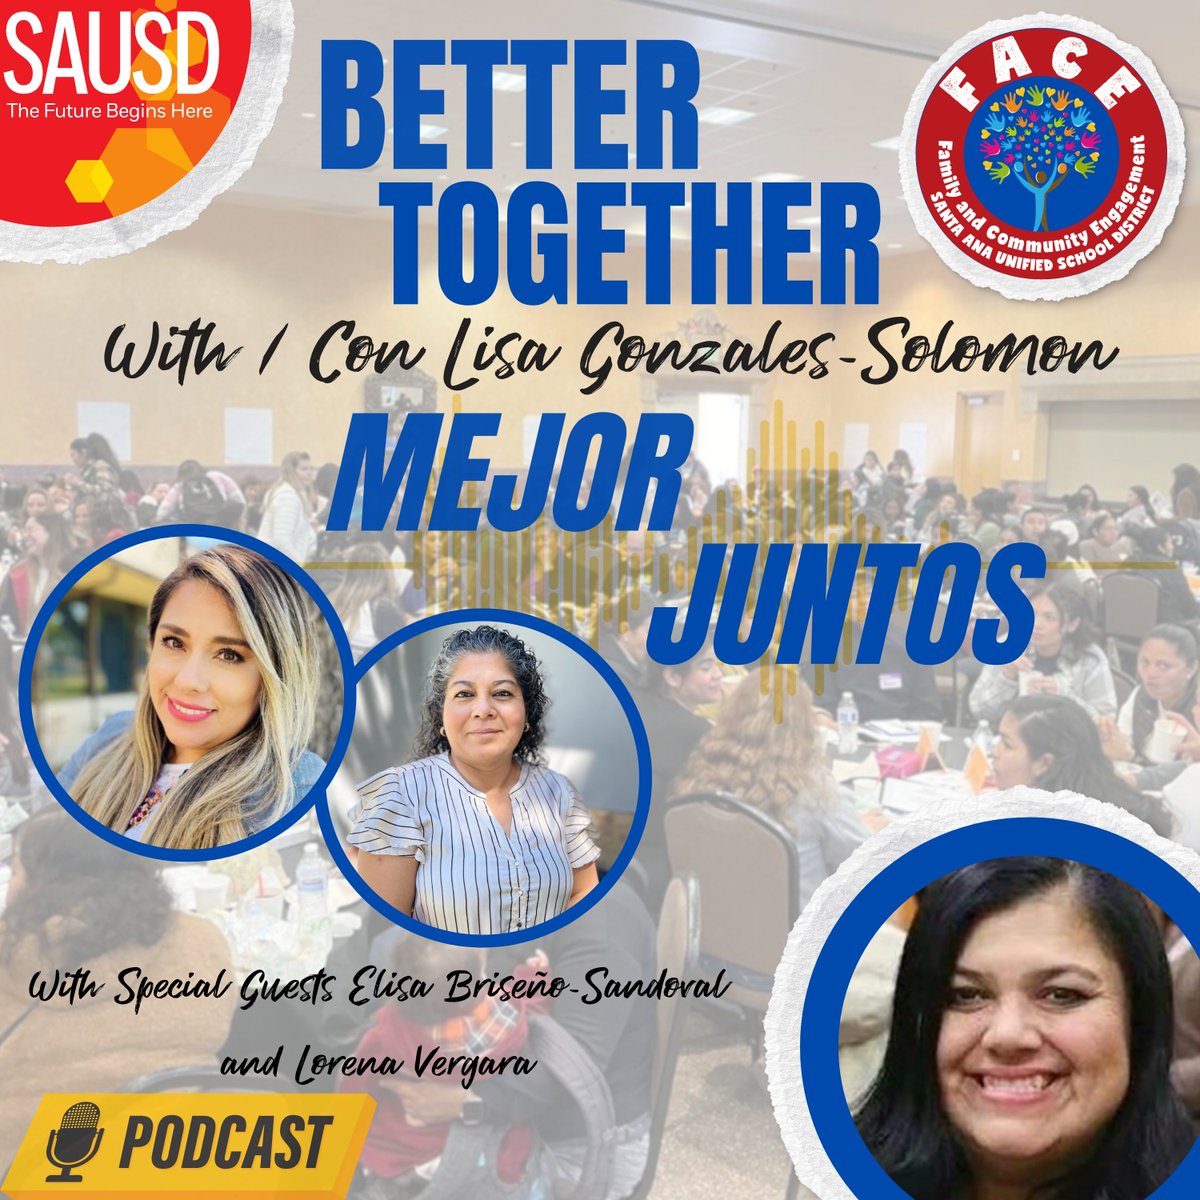 ICYMI: SAUSD’s Better Together / Mejor Juntos, ‘1. Better Together: Uniting Families and Schools for a Thriving Community’, is now streaming! Find us at bit.ly/SAUSDBetterTog… or wherever you listen to podcasts. 🎙️ #wearesausd #bettertogether #education #podcast